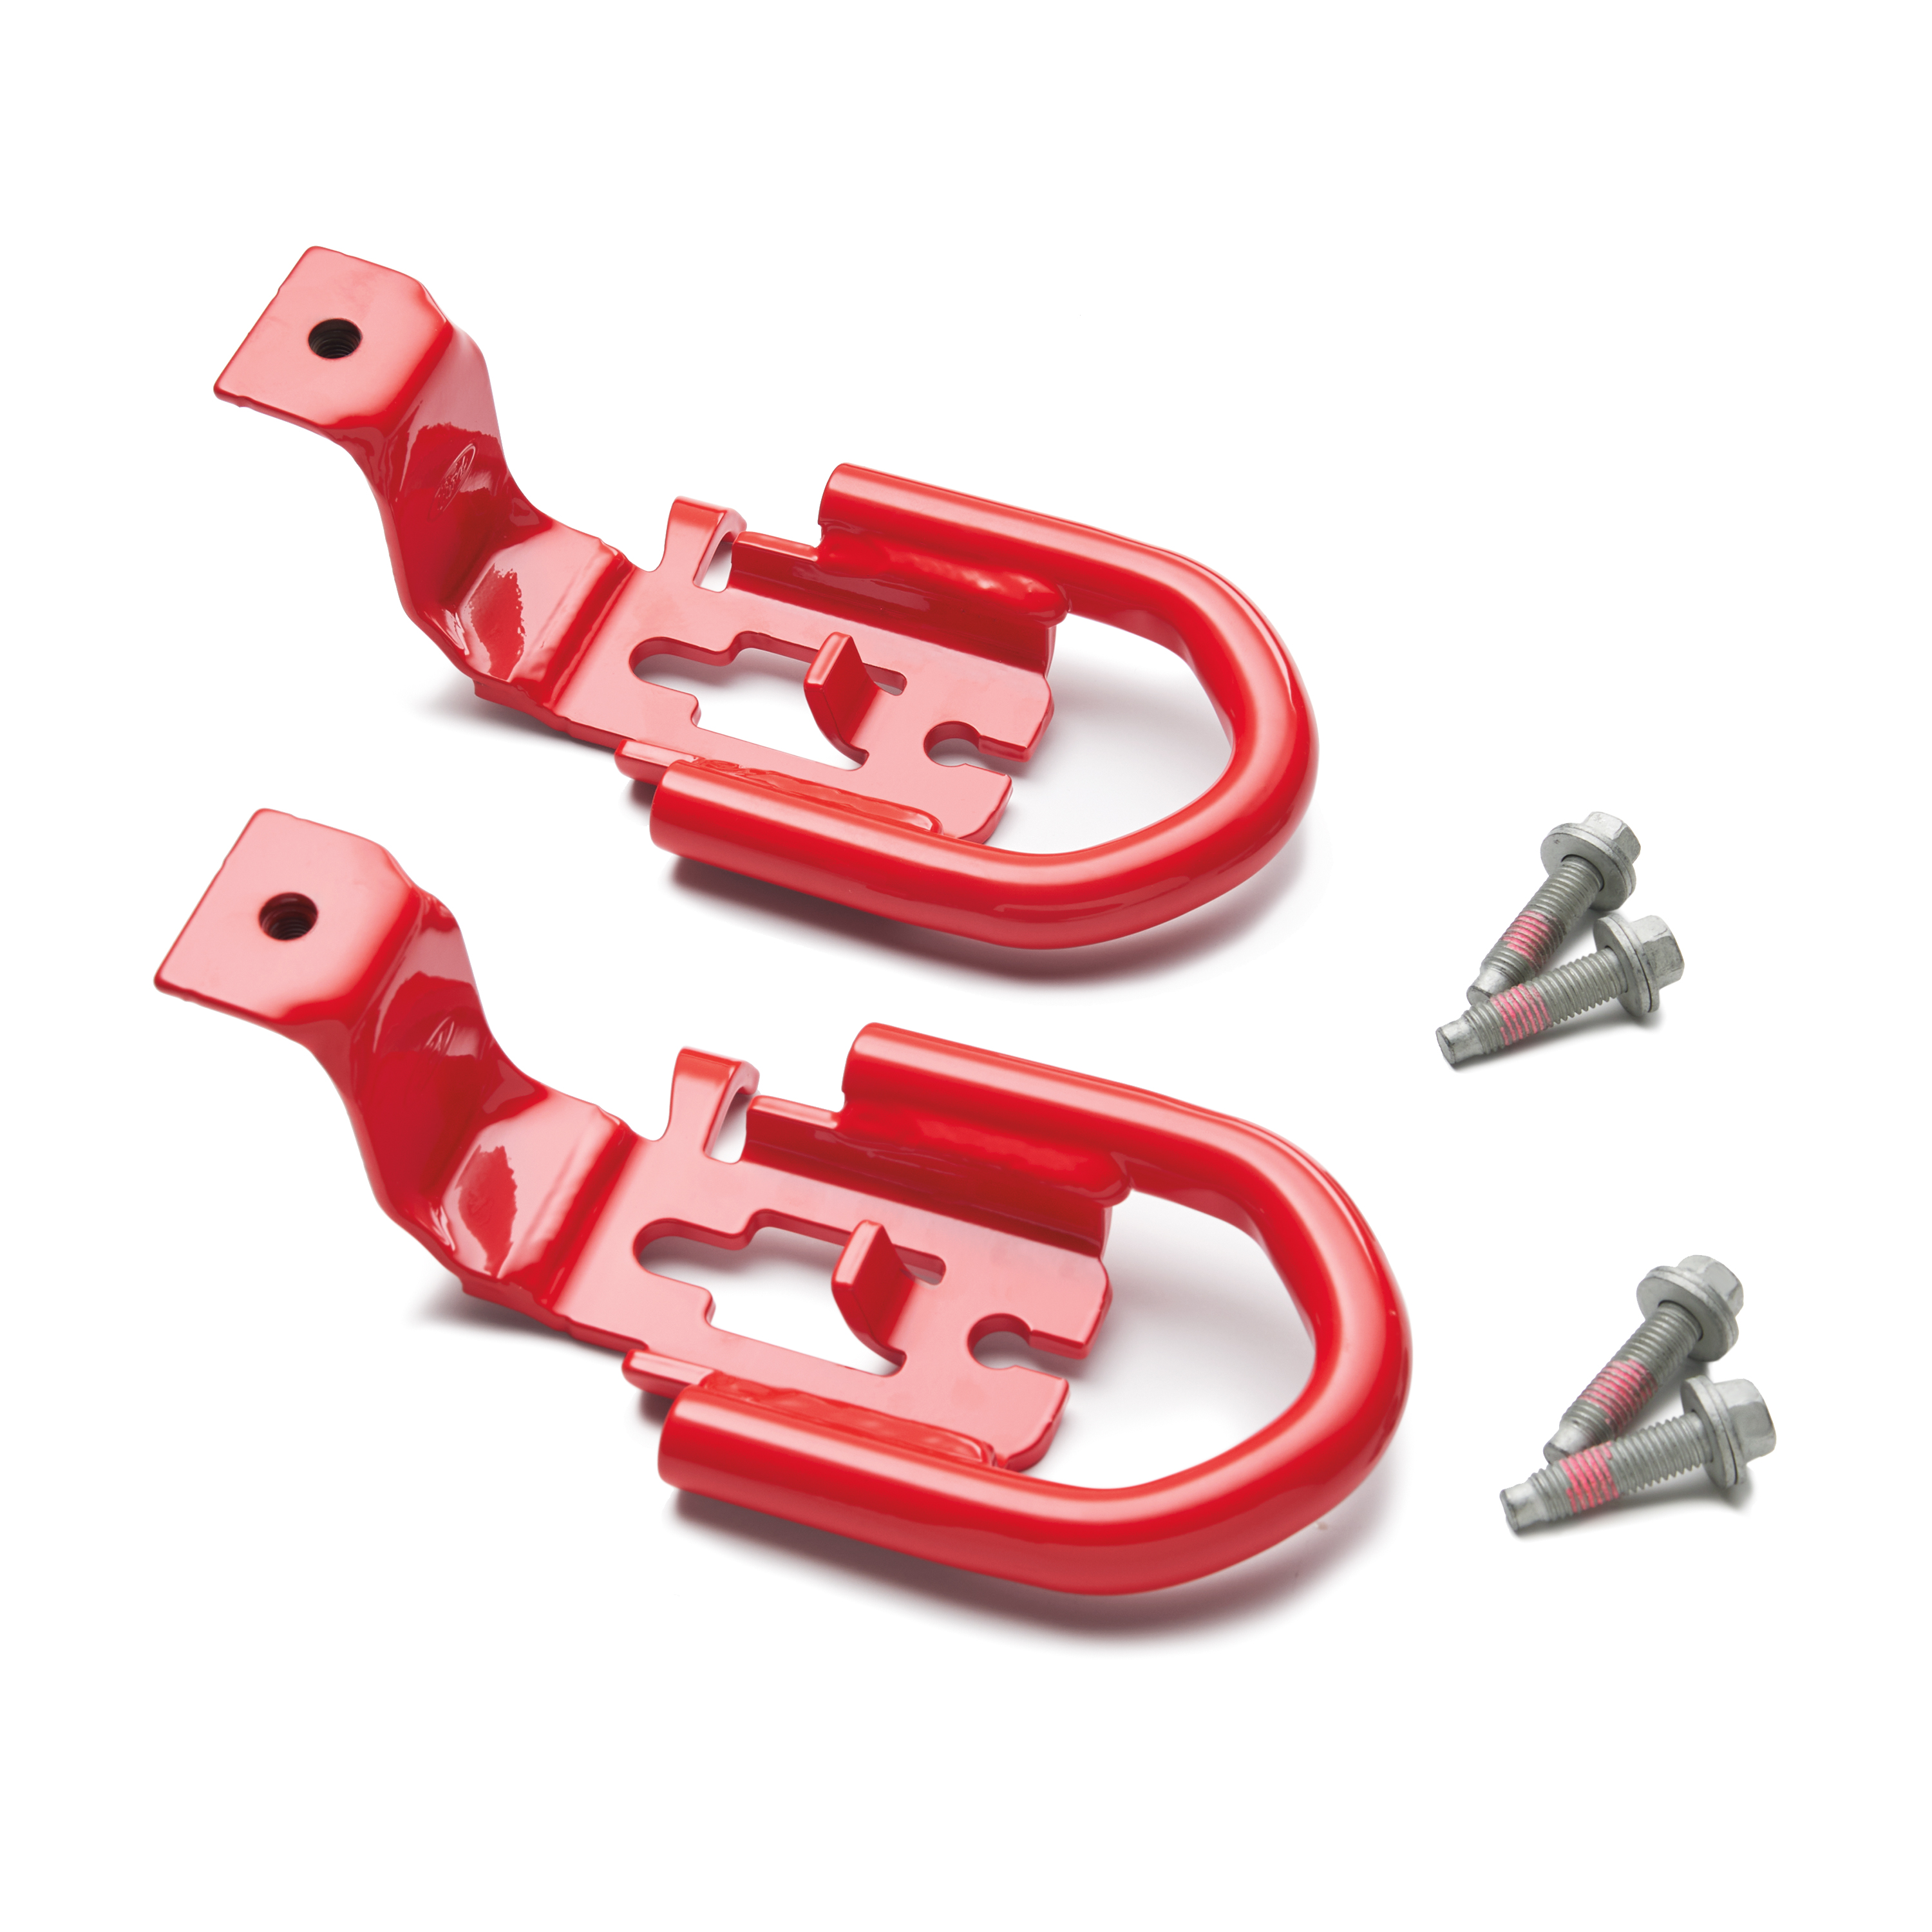 2019-2023 RANGER TOW HOOKS-PAIR-RED, Part Details for M-18954-RA